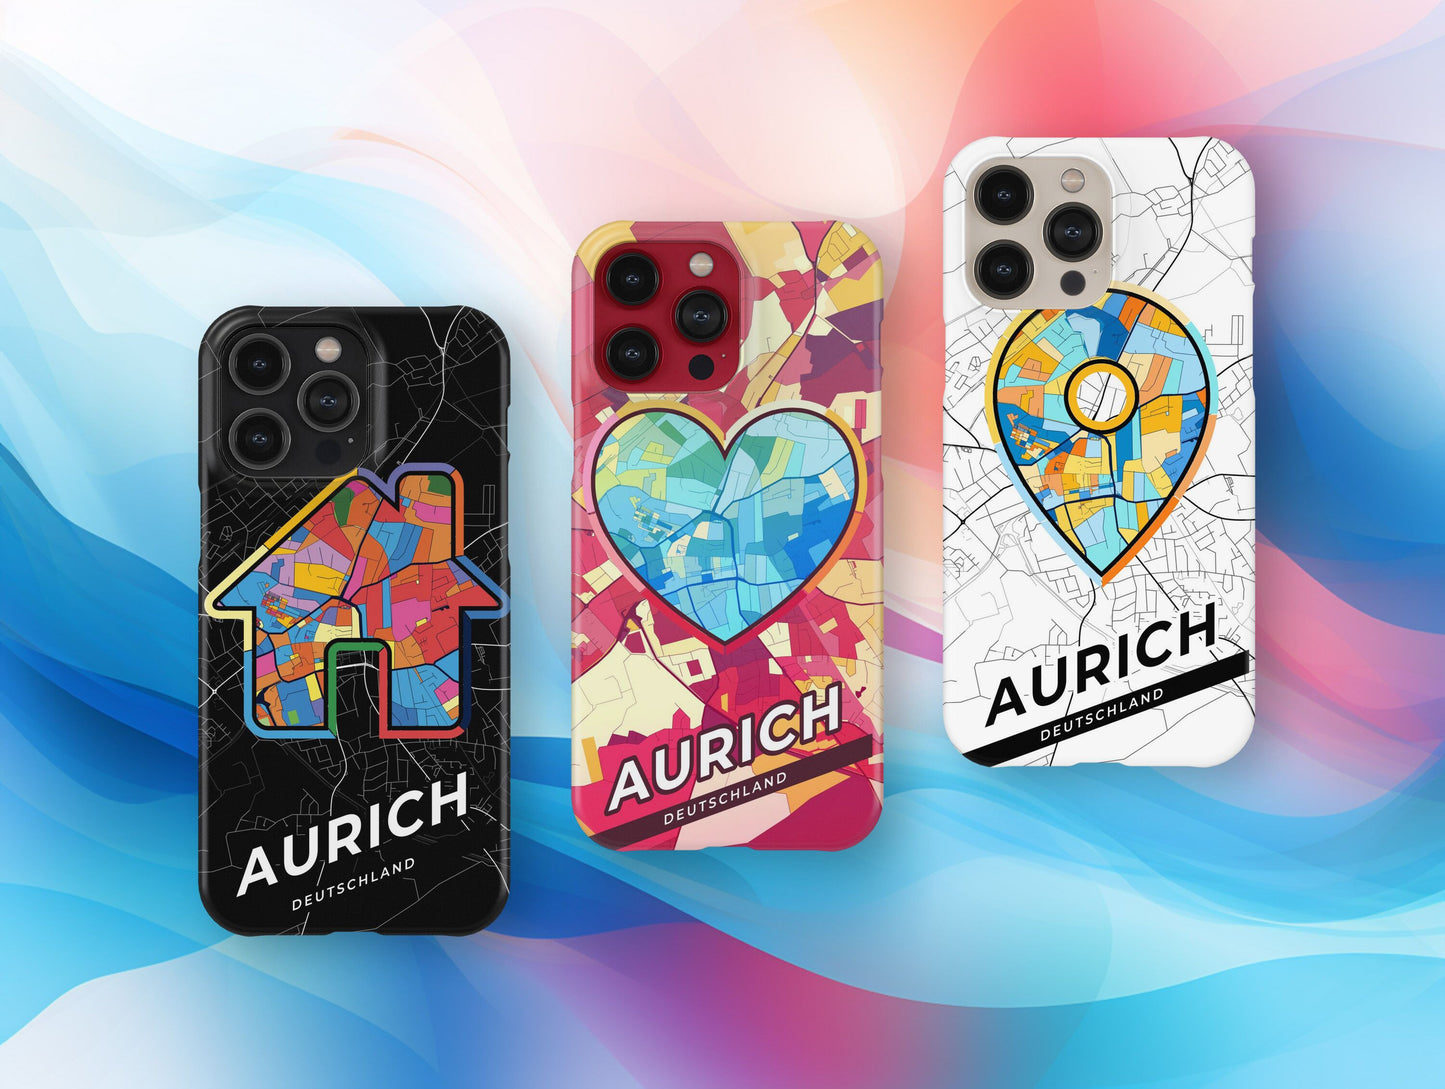 Aurich Deutschland slim phone case with colorful icon. Birthday, wedding or housewarming gift. Couple match cases.